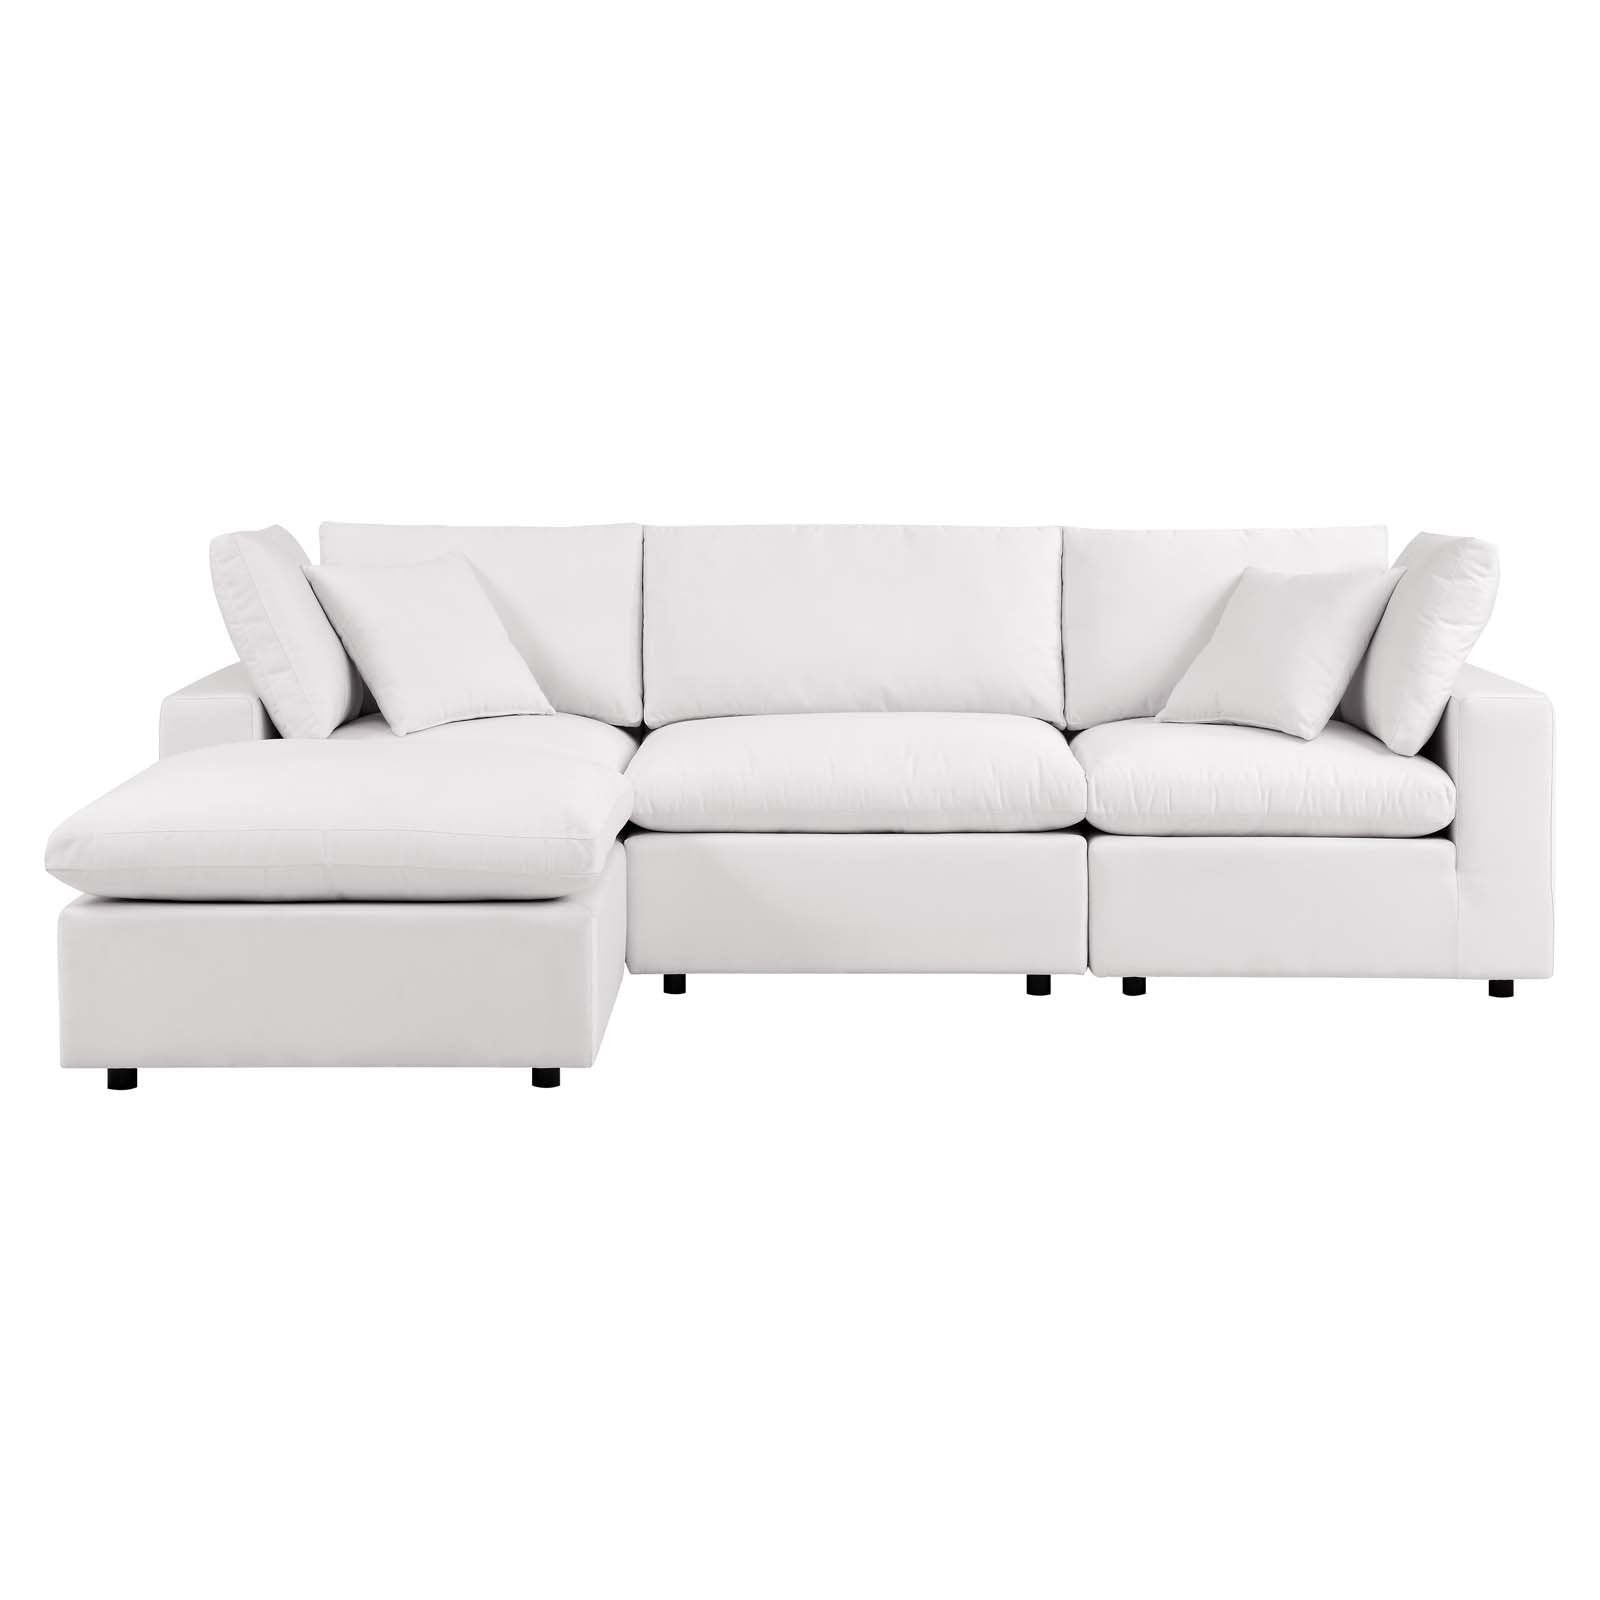 Commix 4-Piece Outdoor Patio Sectional Sofa